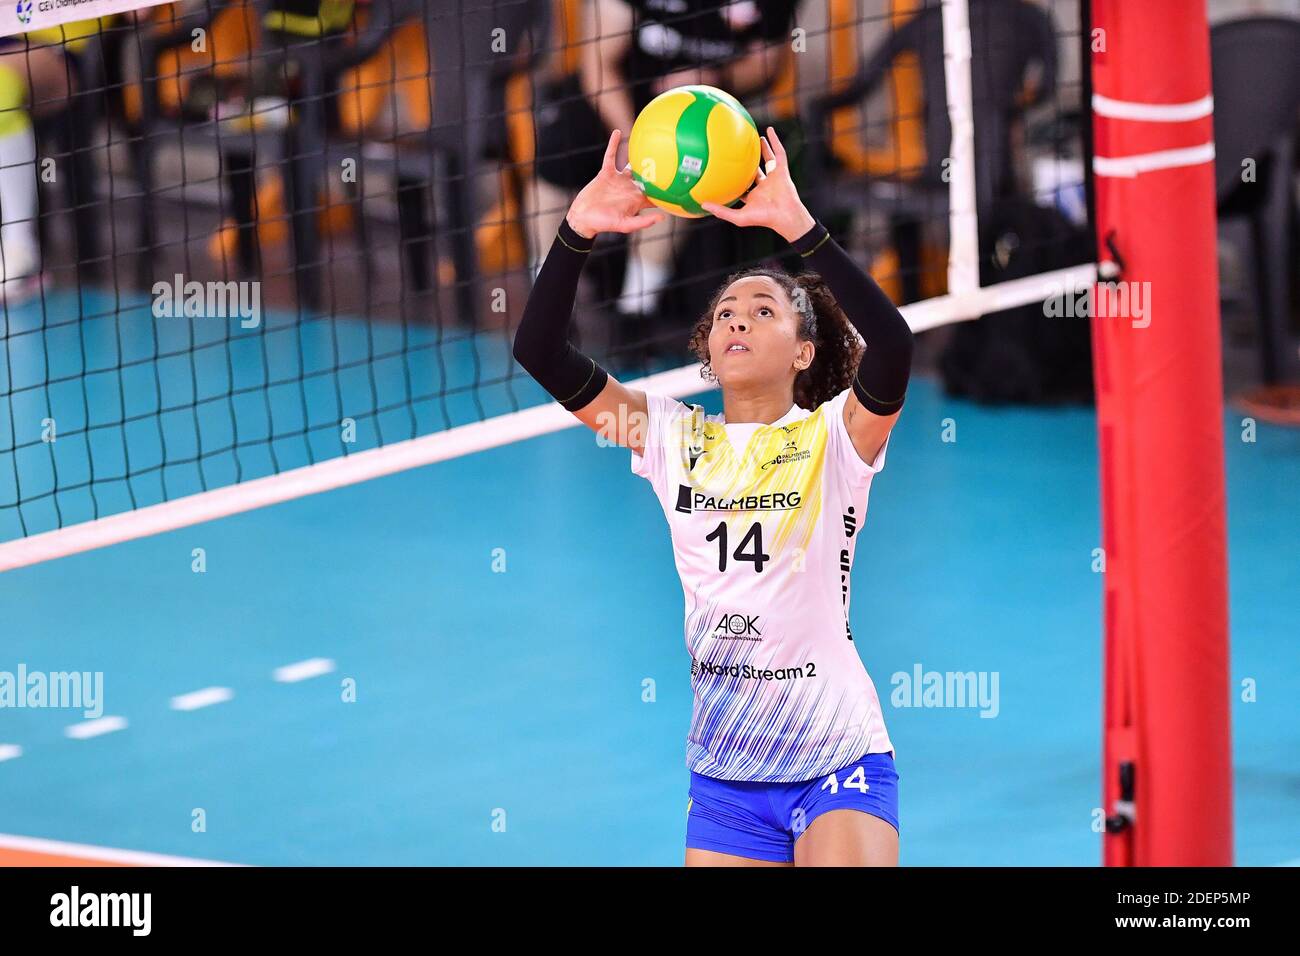 Scandicci, Florence, Italy. 1st Dec, 2020. scandicci, florence, Italy, Palazzetto dello Sport, 01 Dec 2020, Denise Imoudu (SSC Palmberg Schwerin) during SSC Palmberg Schwerin vs Developres SkyRes Rzeszow - CEV Champions League Women volleyball match Credit: Lisa Guglielmi/LPS/ZUMA Wire/Alamy Live News Stock Photo